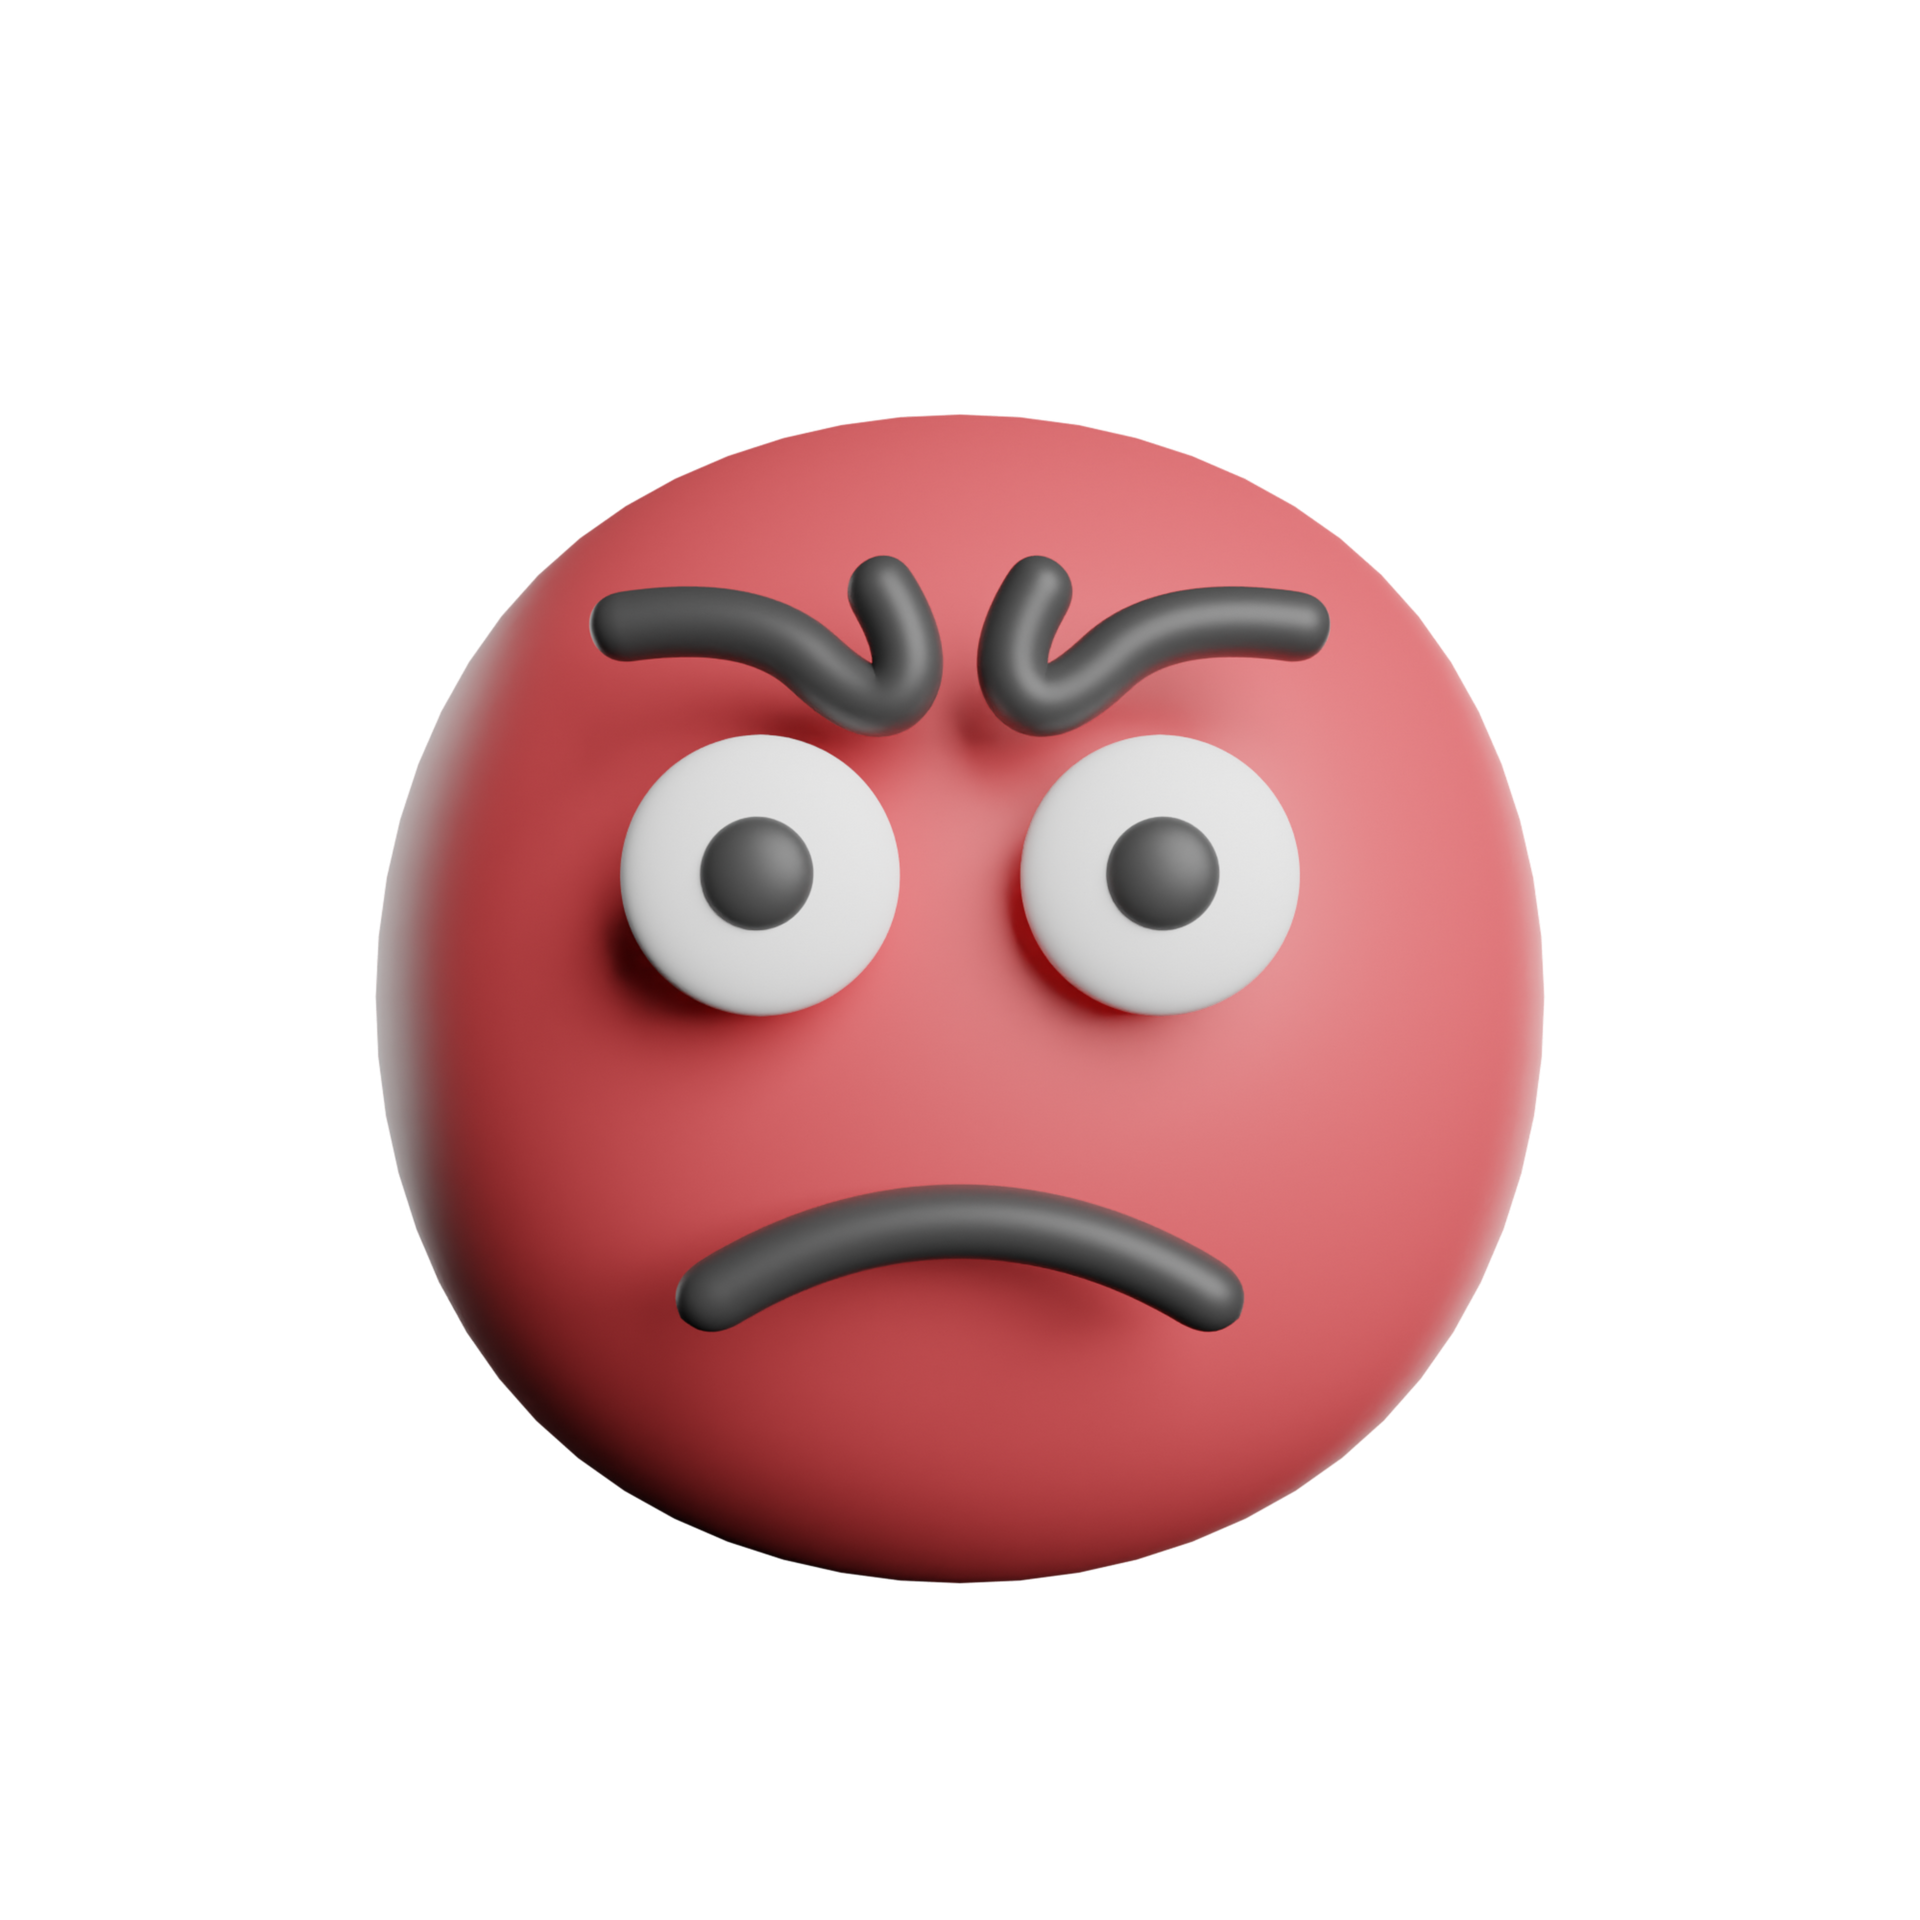 Angry Face PNG Photos